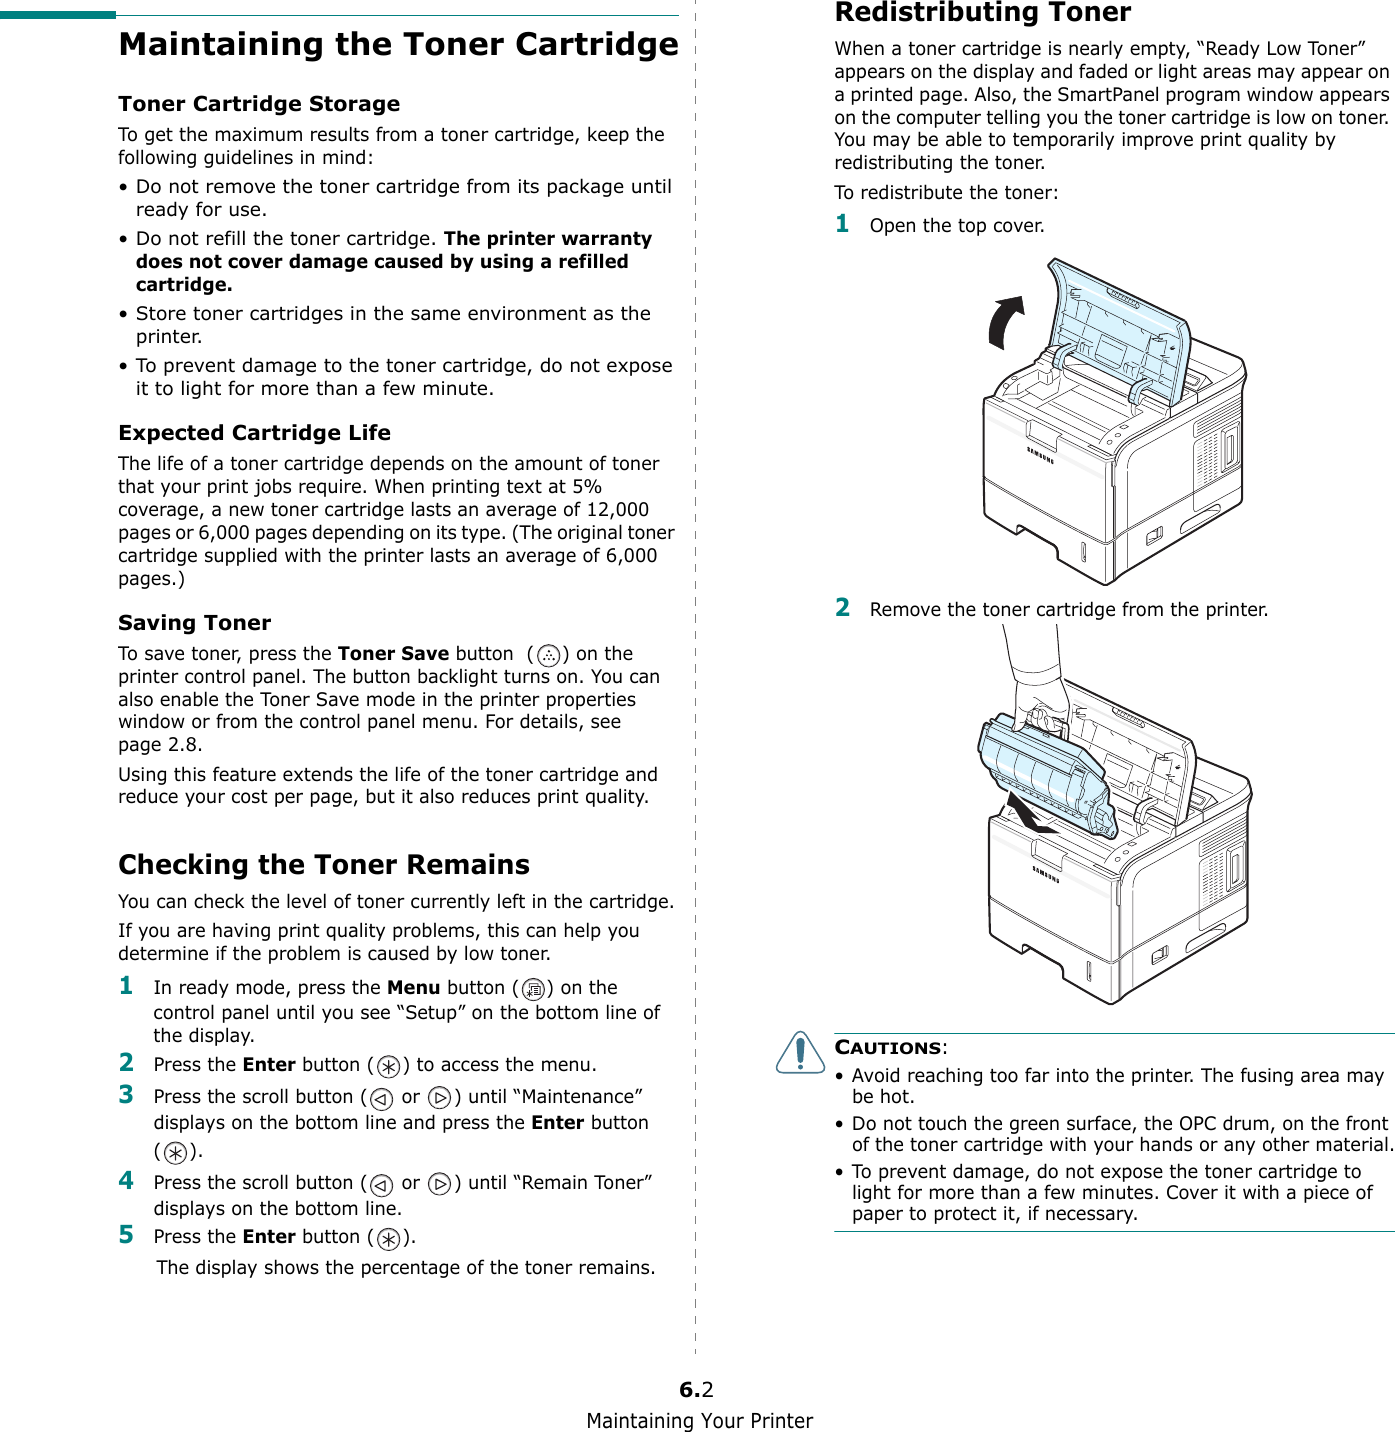 Maintaining Your Printer6.2Maintaining the Toner CartridgeToner Cartridge StorageTo get the maximum results from a toner cartridge, keep the following guidelines in mind:• Do not remove the toner cartridge from its package until ready for use. • Do not refill the toner cartridge. The printer warranty does not cover damage caused by using a refilled cartridge.• Store toner cartridges in the same environment as the printer.• To prevent damage to the toner cartridge, do not expose it to light for more than a few minute.Expected Cartridge LifeThe life of a toner cartridge depends on the amount of toner that your print jobs require. When printing text at 5% coverage, a new toner cartridge lasts an average of 12,000 pages or 6,000 pages depending on its type. (The original toner cartridge supplied with the printer lasts an average of 6,000 pages.)Saving TonerTo save toner, press the Toner Save button  ( ) on the printer control panel. The button backlight turns on. You can also enable the Toner Save mode in the printer properties window or from the control panel menu. For details, see page 2.8. Using this feature extends the life of the toner cartridge and reduce your cost per page, but it also reduces print quality. Checking the Toner RemainsYou can check the level of toner currently left in the cartridge.If you are having print quality problems, this can help you determine if the problem is caused by low toner.1In ready mode, press the Menu button ( ) on the control panel until you see “Setup” on the bottom line of the display.2Press the Enter button ( ) to access the menu.3Press the scroll button (  or  ) until “Maintenance” displays on the bottom line and press the Enter button ().4Press the scroll button (  or  ) until “Remain Toner” displays on the bottom line.5Press the Enter button ( ).The display shows the percentage of the toner remains.Redistributing TonerWhen a toner cartridge is nearly empty, “Ready Low Toner” appears on the display and faded or light areas may appear on a printed page. Also, the SmartPanel program window appears on the computer telling you the toner cartridge is low on toner. You may be able to temporarily improve print quality by redistributing the toner.To redistribute the toner:1Open the top cover.2Remove the toner cartridge from the printer.CAUTIONS: • Avoid reaching too far into the printer. The fusing area may be hot.• Do not touch the green surface, the OPC drum, on the front of the toner cartridge with your hands or any other material.• To prevent damage, do not expose the toner cartridge to light for more than a few minutes. Cover it with a piece of paper to protect it, if necessary.